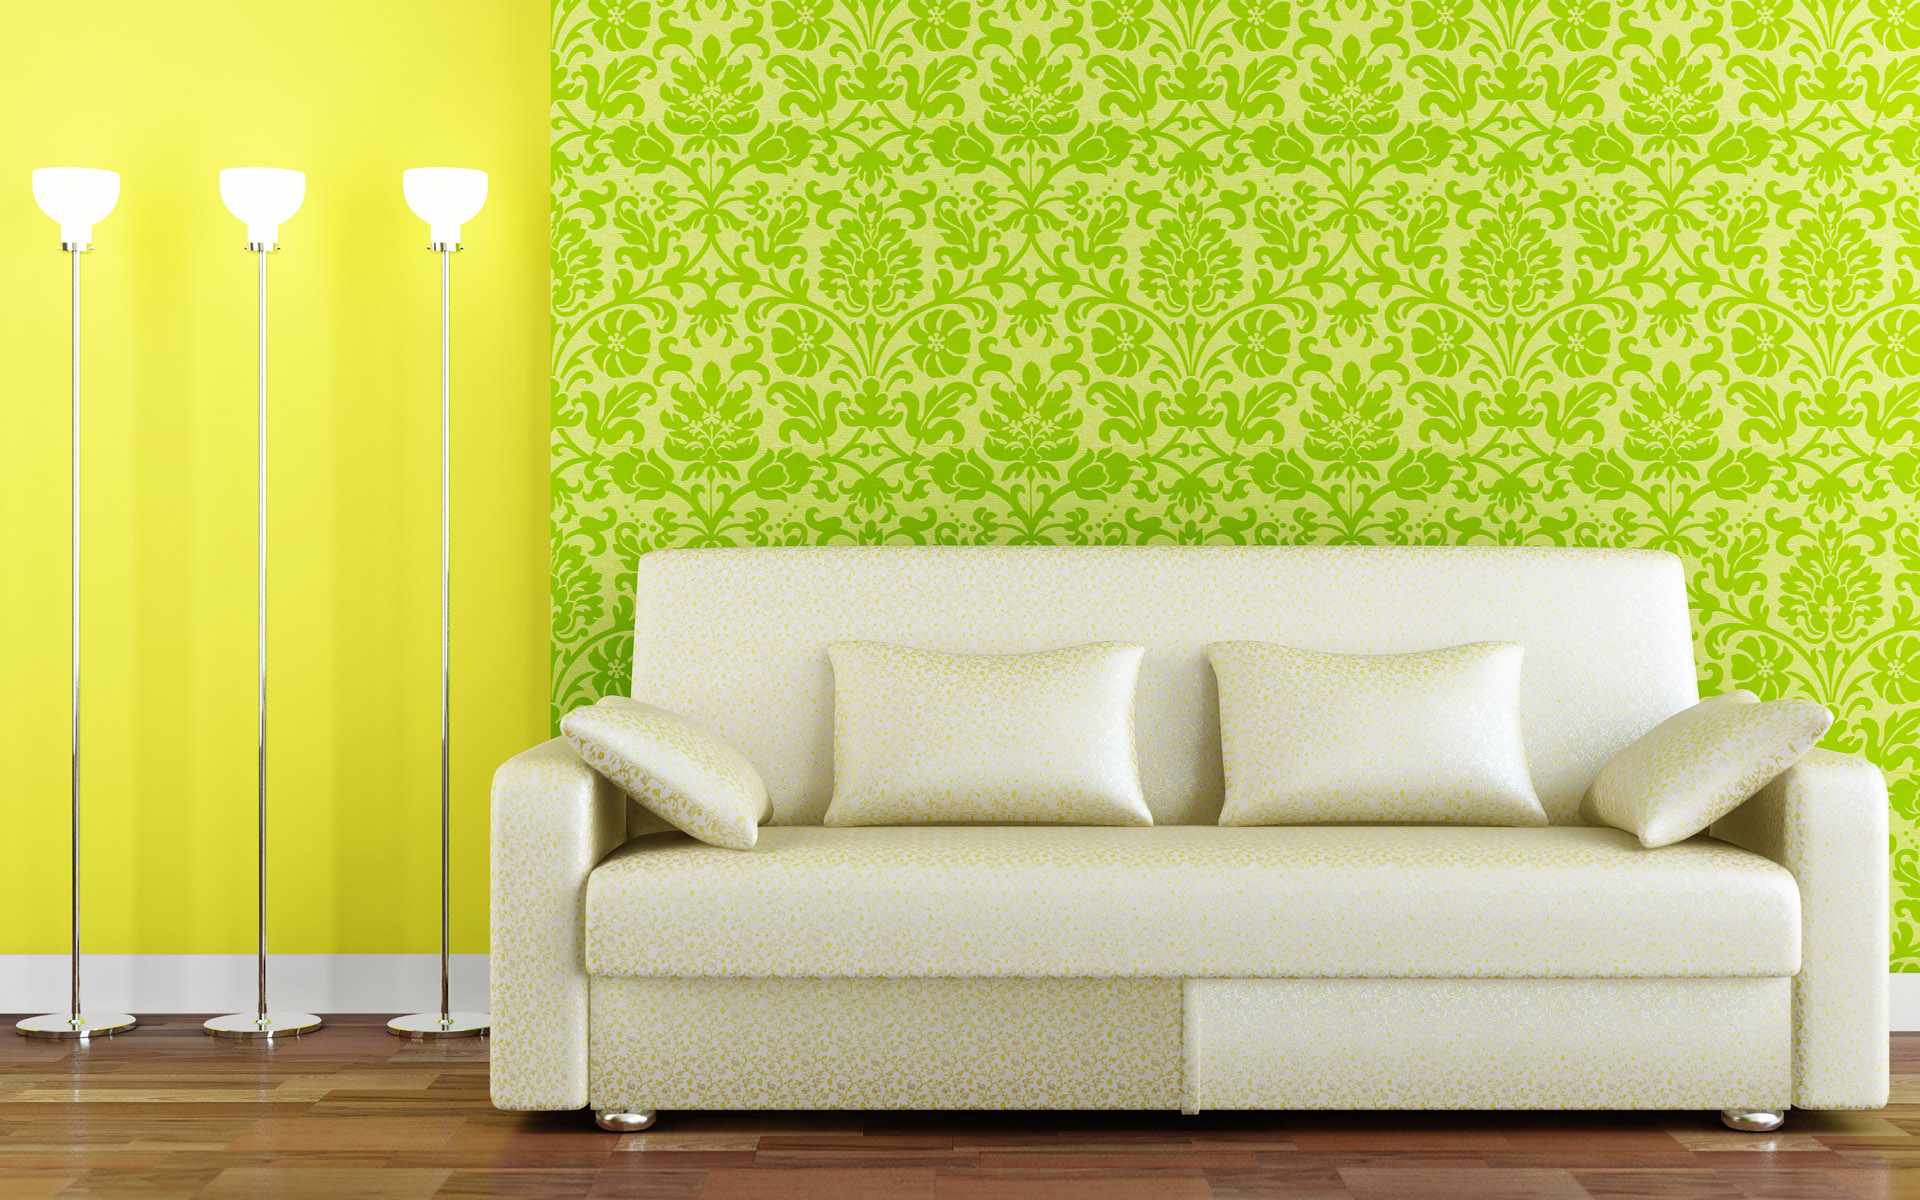 Image for WALLPAPER FOR YOUR ROOM REMODELLING IDEAS 13 ON WALL DESIGN